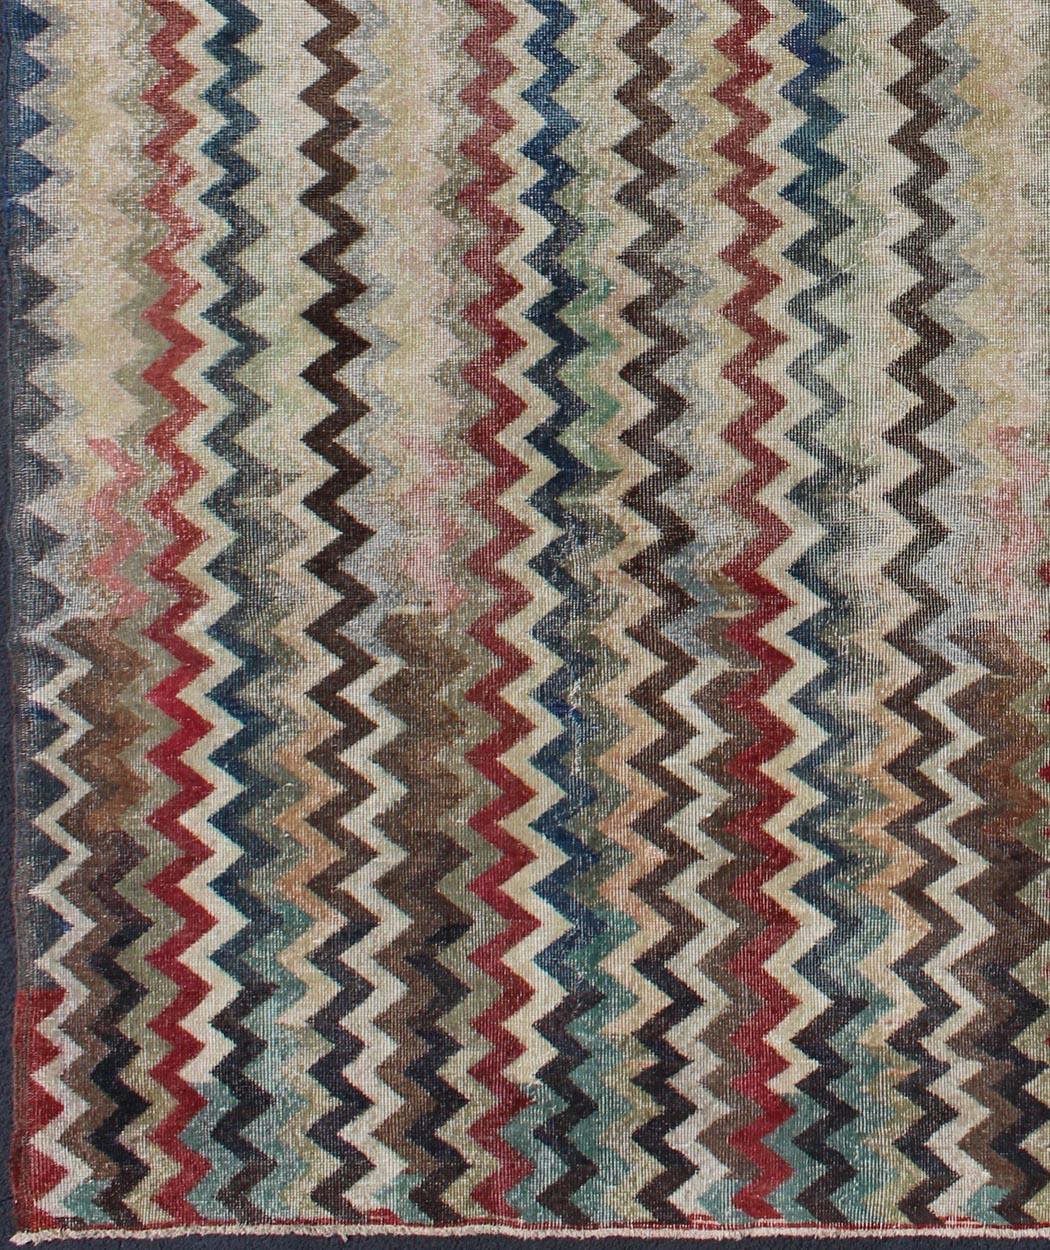 Rendered in zig-zag lines that run parallel to each other amidst an assortment of rich colors, this very unique Vintage Turkish rug showcases a Mid-Century modern design in navy, red, green, brown & cream colors.
Measures: 7'4 x 9'11.
